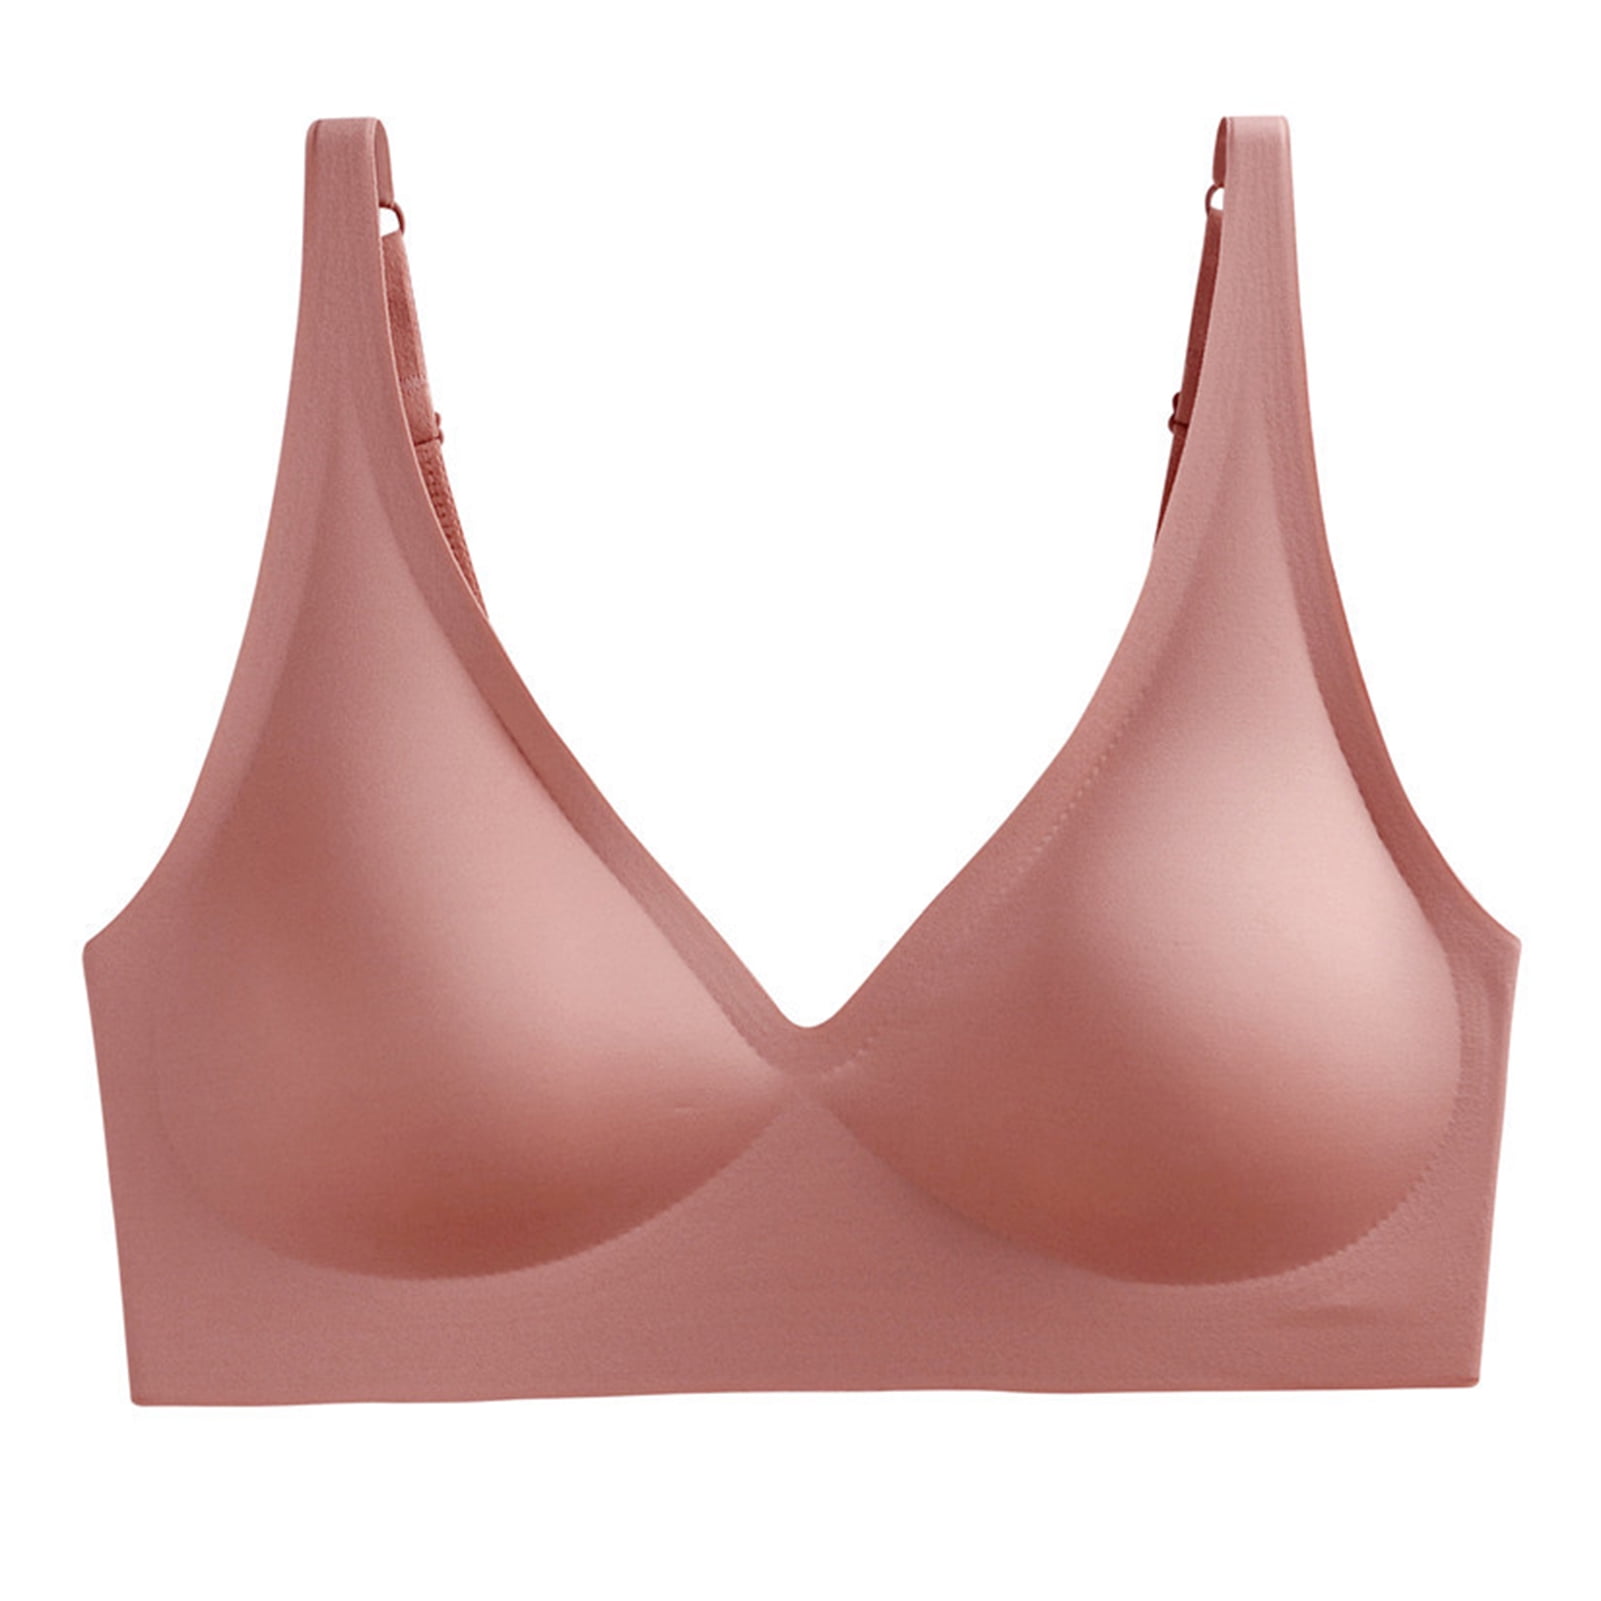 harmtty Lady Bra Padded Sexy Soft Intimate Solid Color Support Breast  Seamless Wire Free V Neck Sports Bra for Daily Wear,Skin Color 